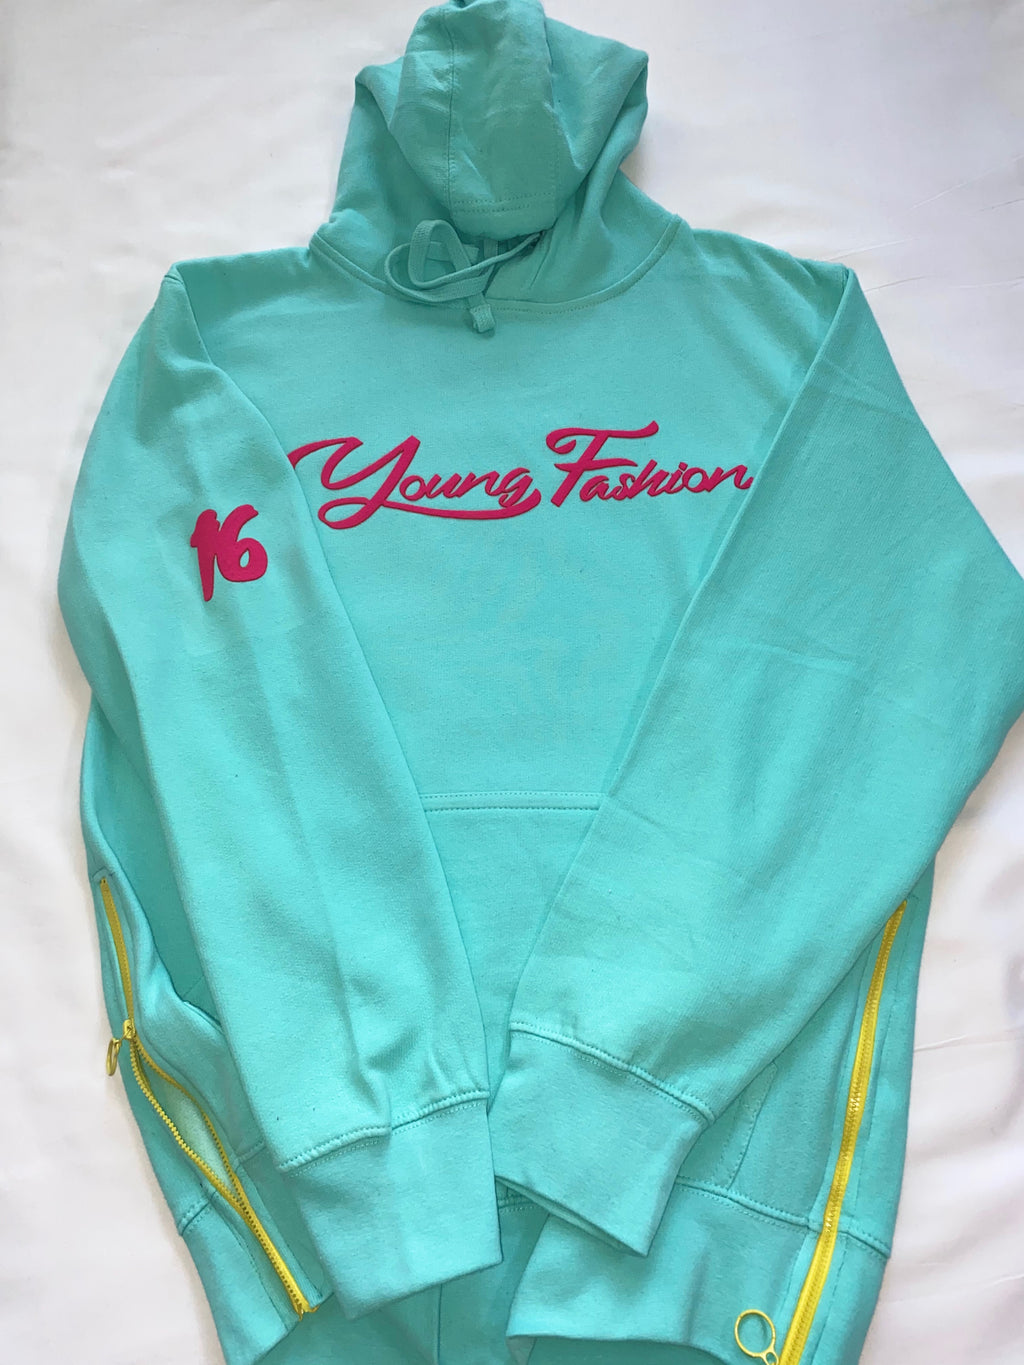 YOUNG FASHION "PARADISE" 16 COLLECTION HOODIE